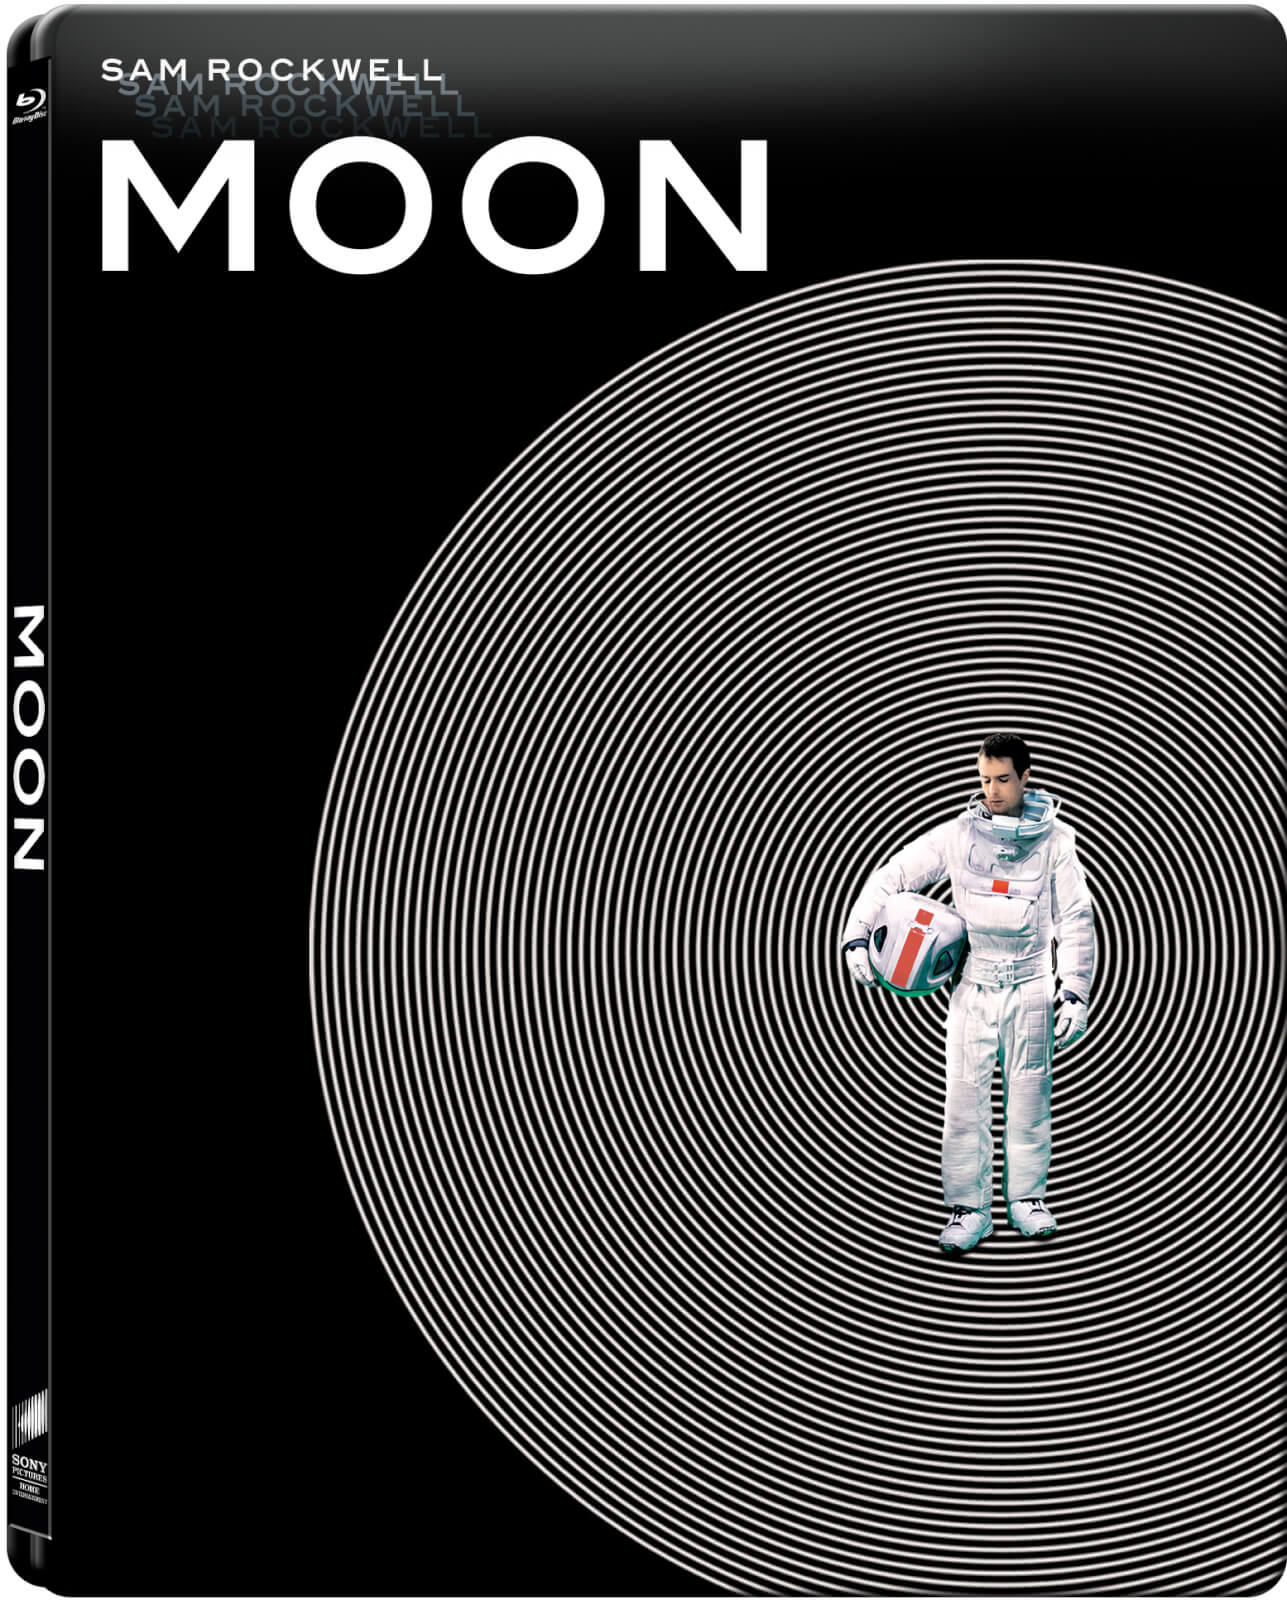 Moon - Zavvi Exclusive Limited Edition Steelbook (Includes DVD Version) (Limited to 1000 Copies)